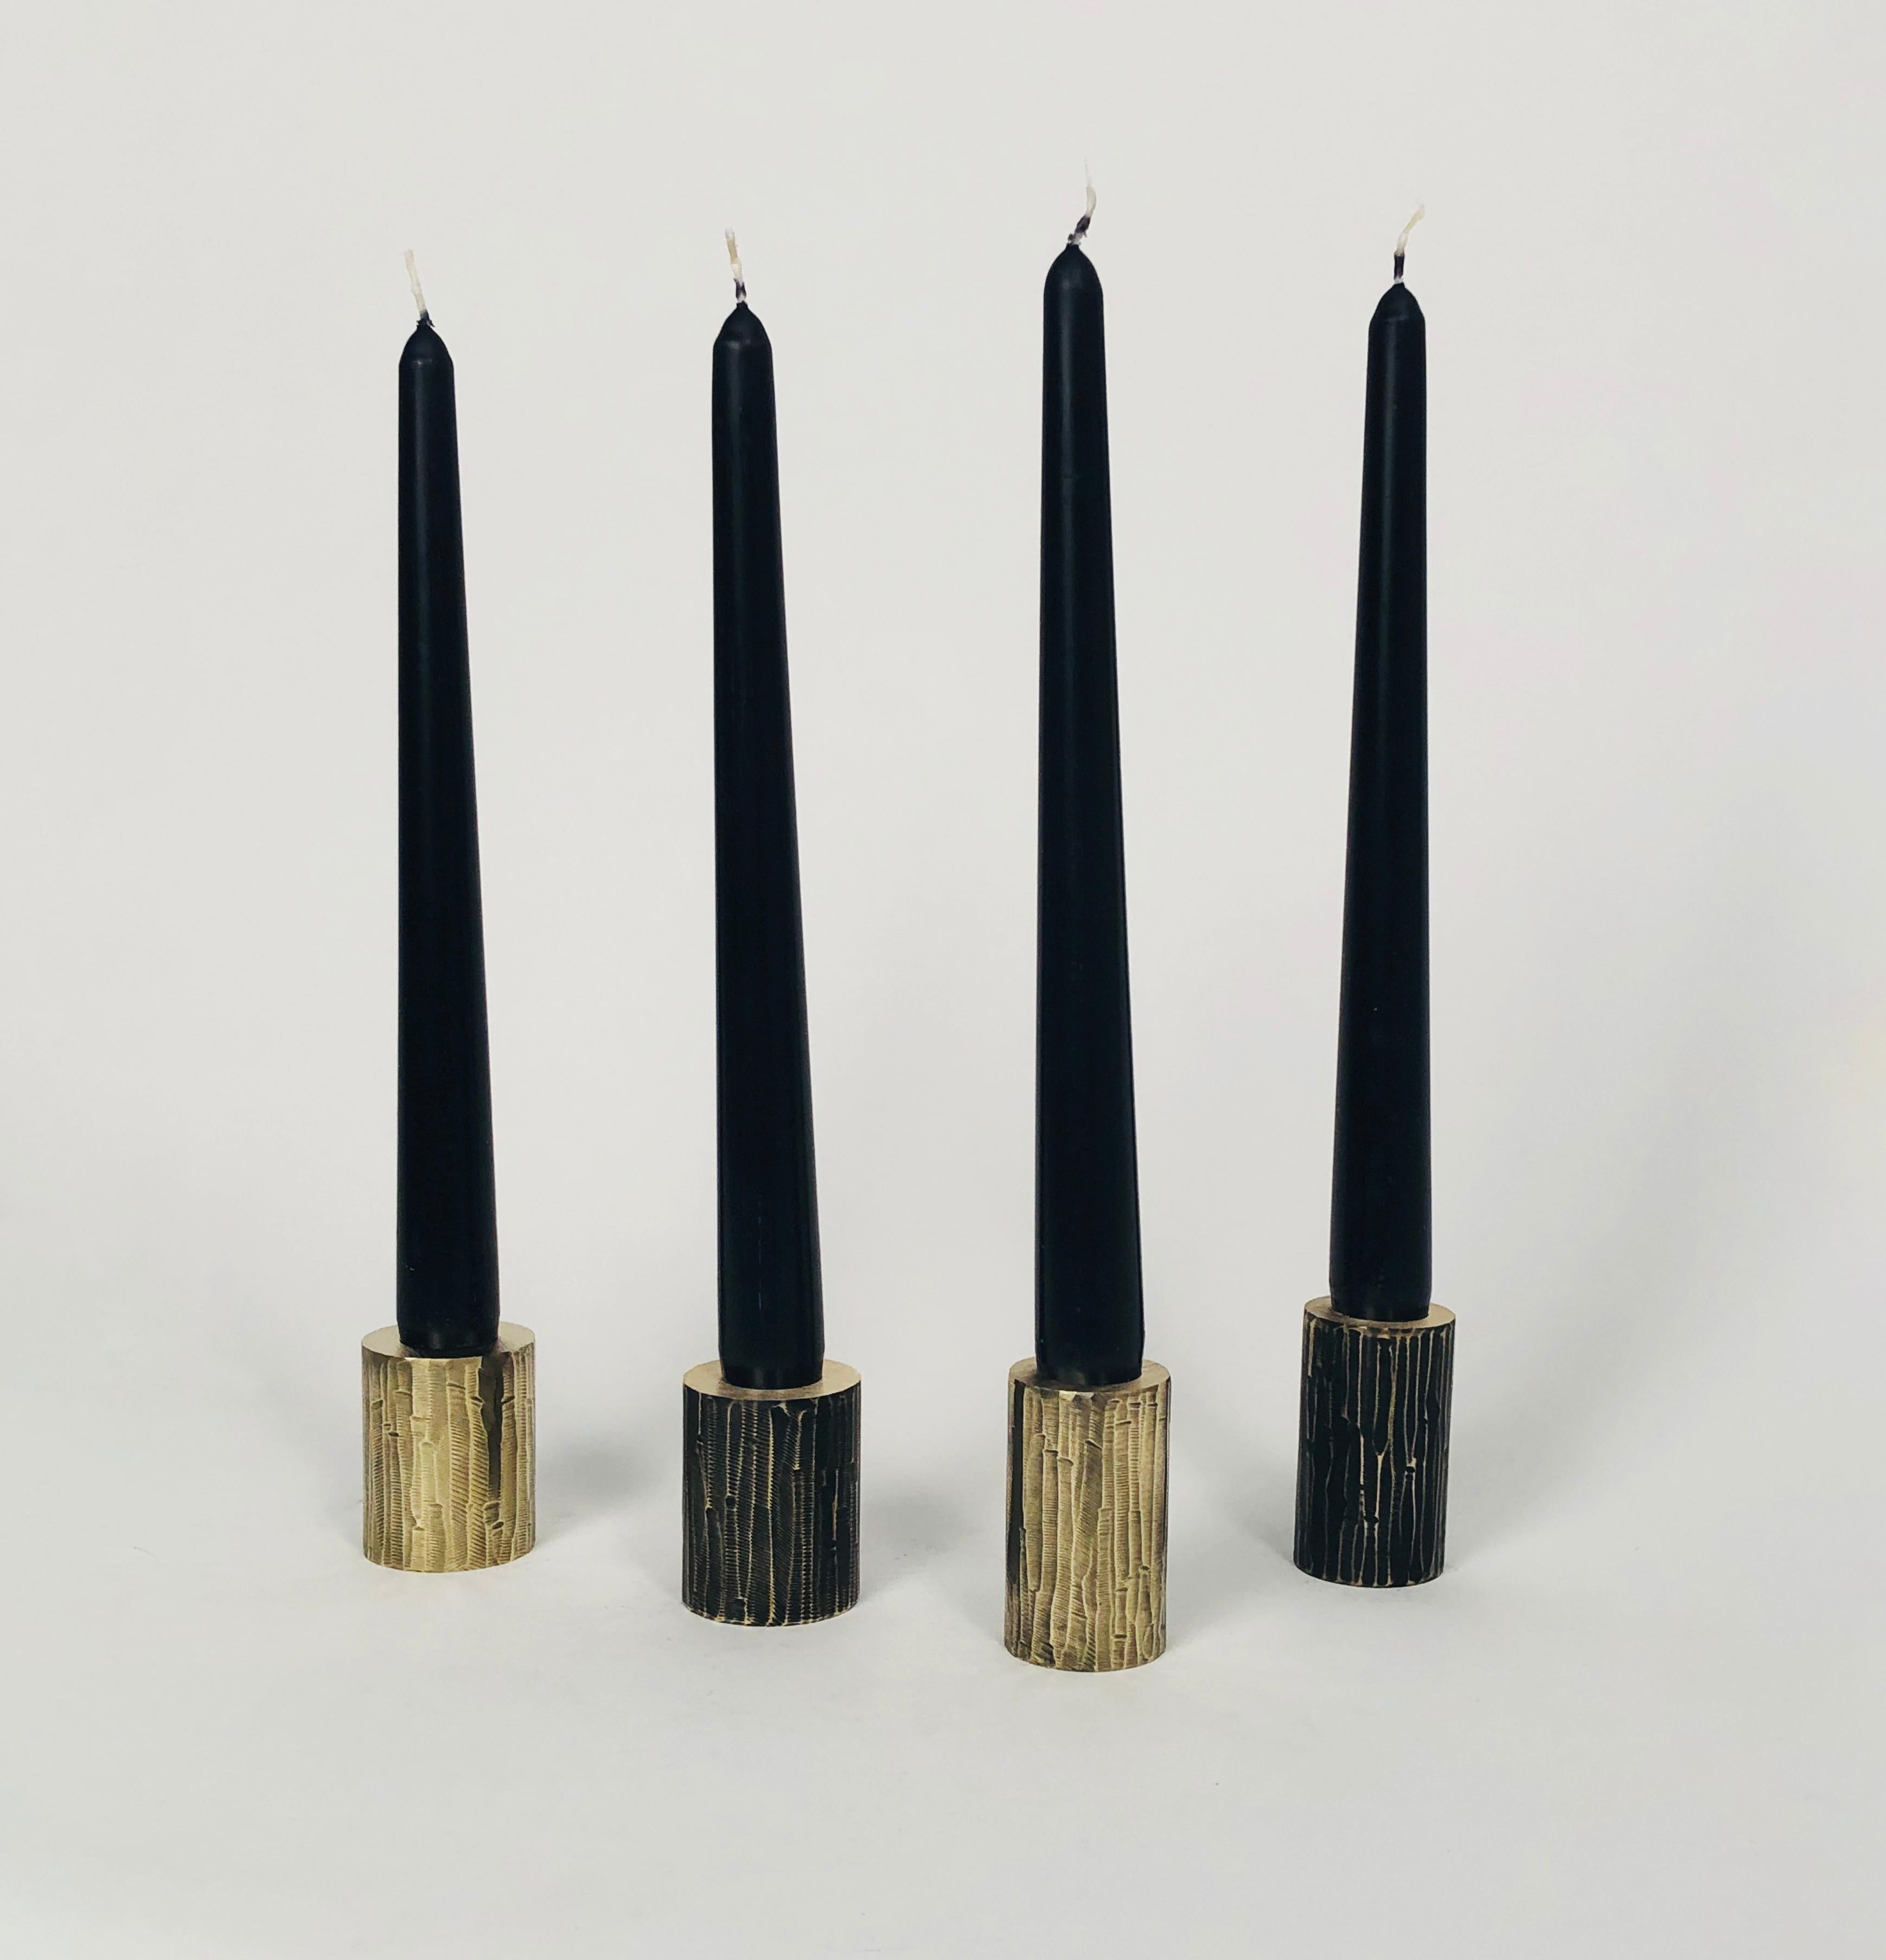 Set of 4 solid brass sculpted candleholders by William Guillon 
Each is signed William Guillon
Dimensions: diameter 4 x height 5 cm
 Diameter 3.5 x height 6 cm
Materials: Solid brass raw finish or patinated black, with polished